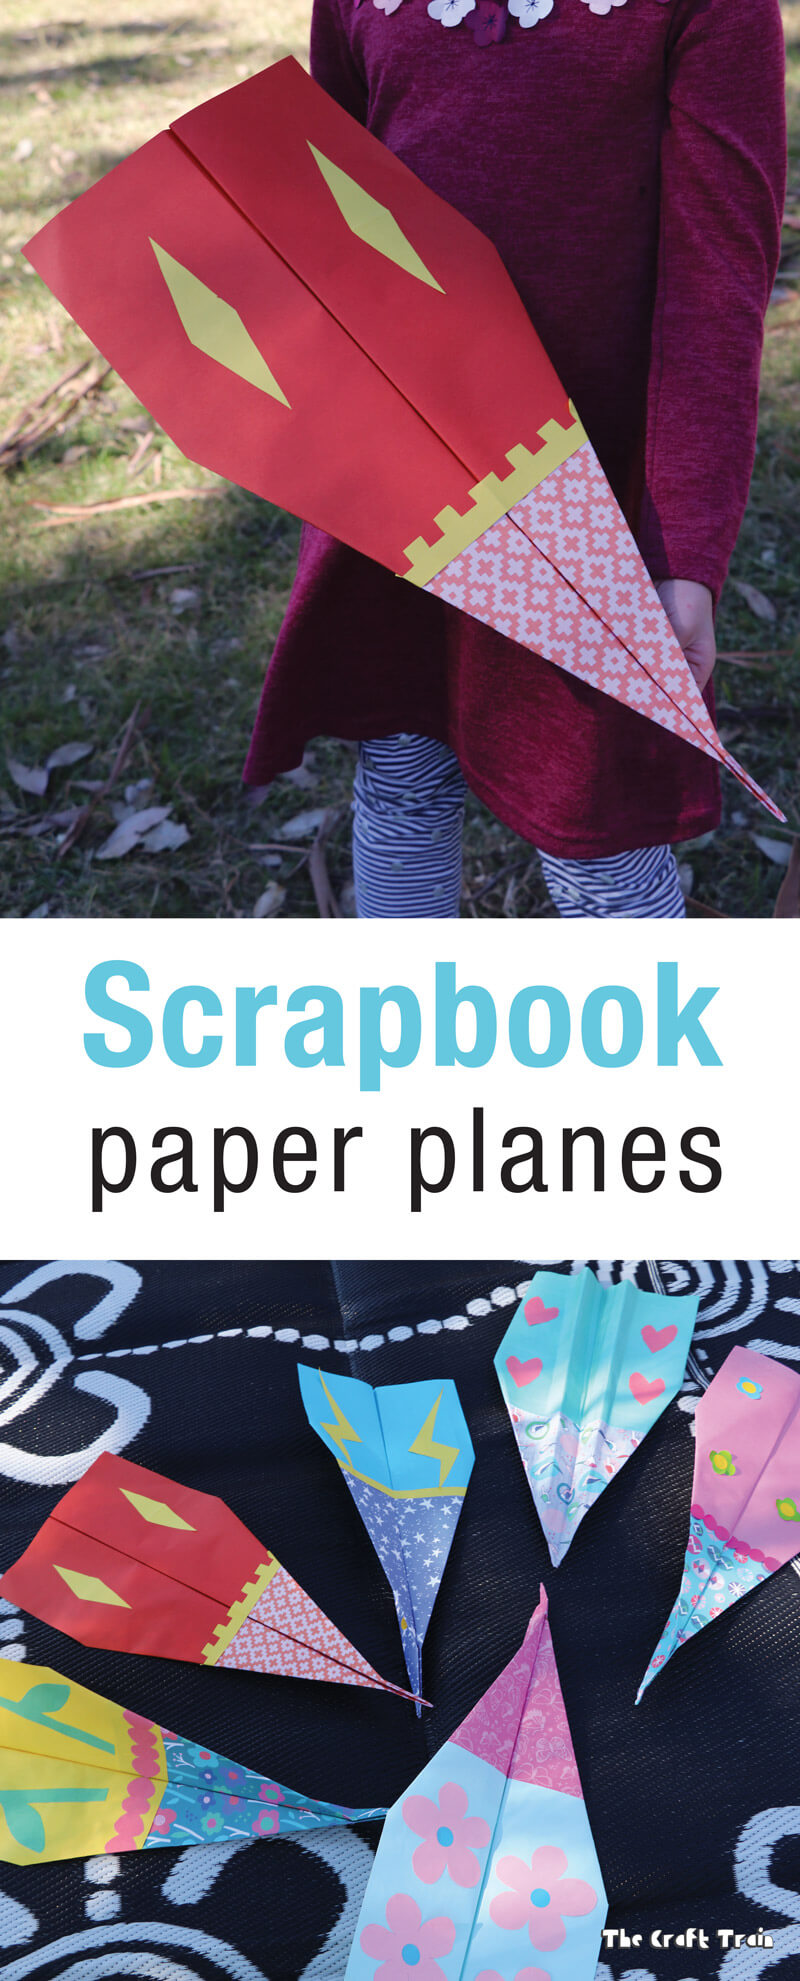 Make scrapbook paper planes and fly them outdoors! This is a fun STEM or STEAM craft for kids with a creative twist on the original paper plane. #paperplane #papercraft #kidscraft #outdoorideas #kidsactivities #scrapbookpaper #STEM #STEAM